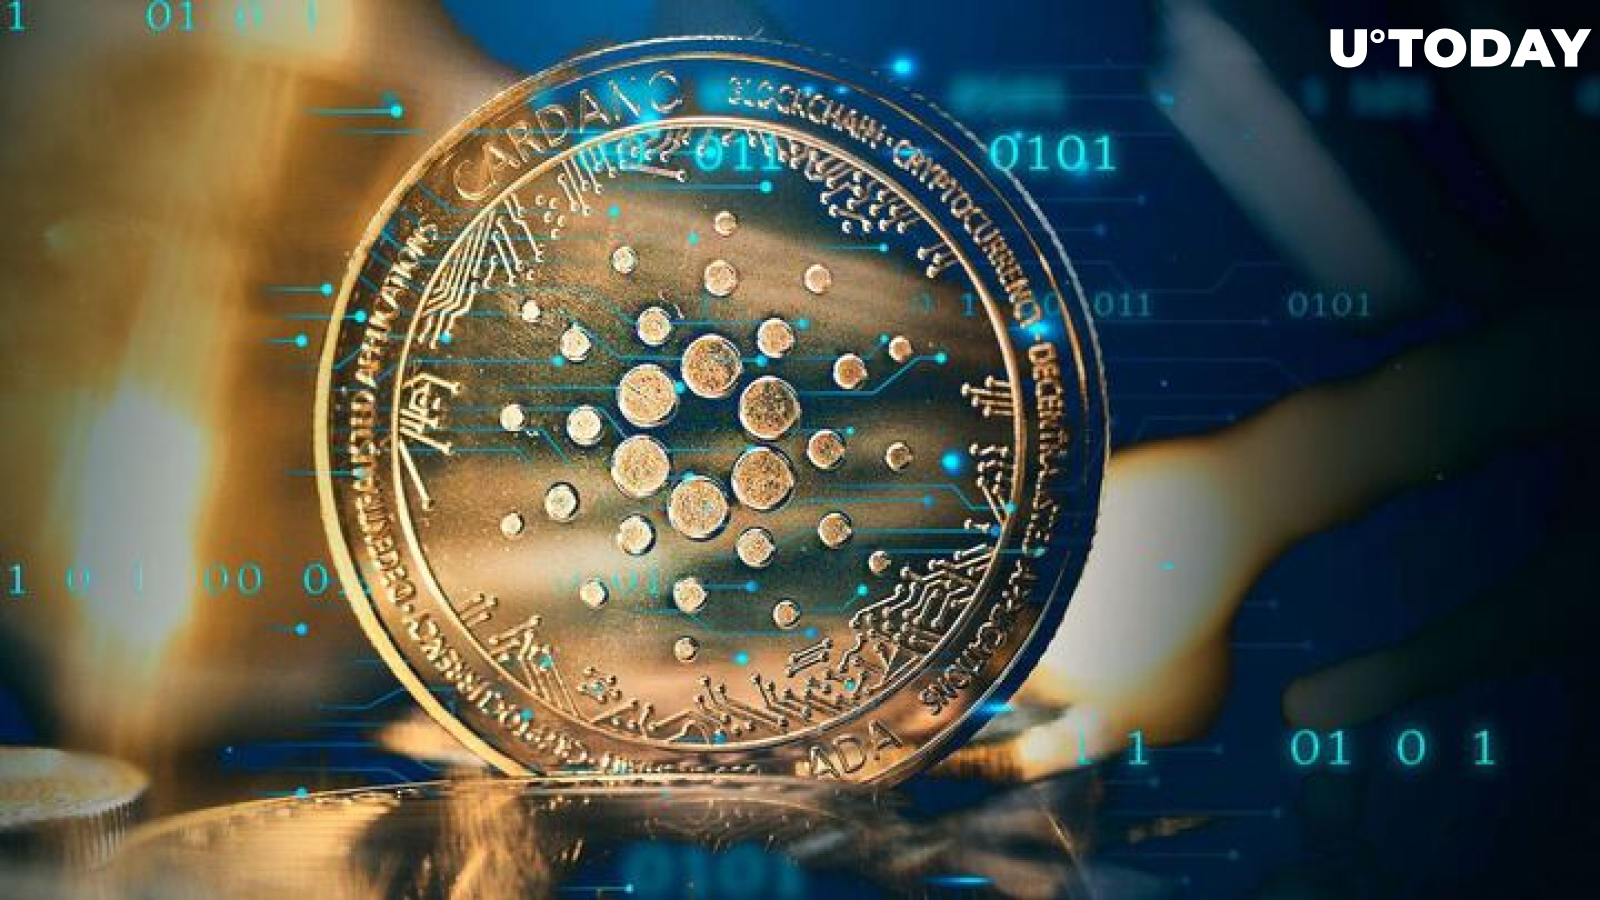 Cardano Blockchain Insights Hide Some Intriguing Stats